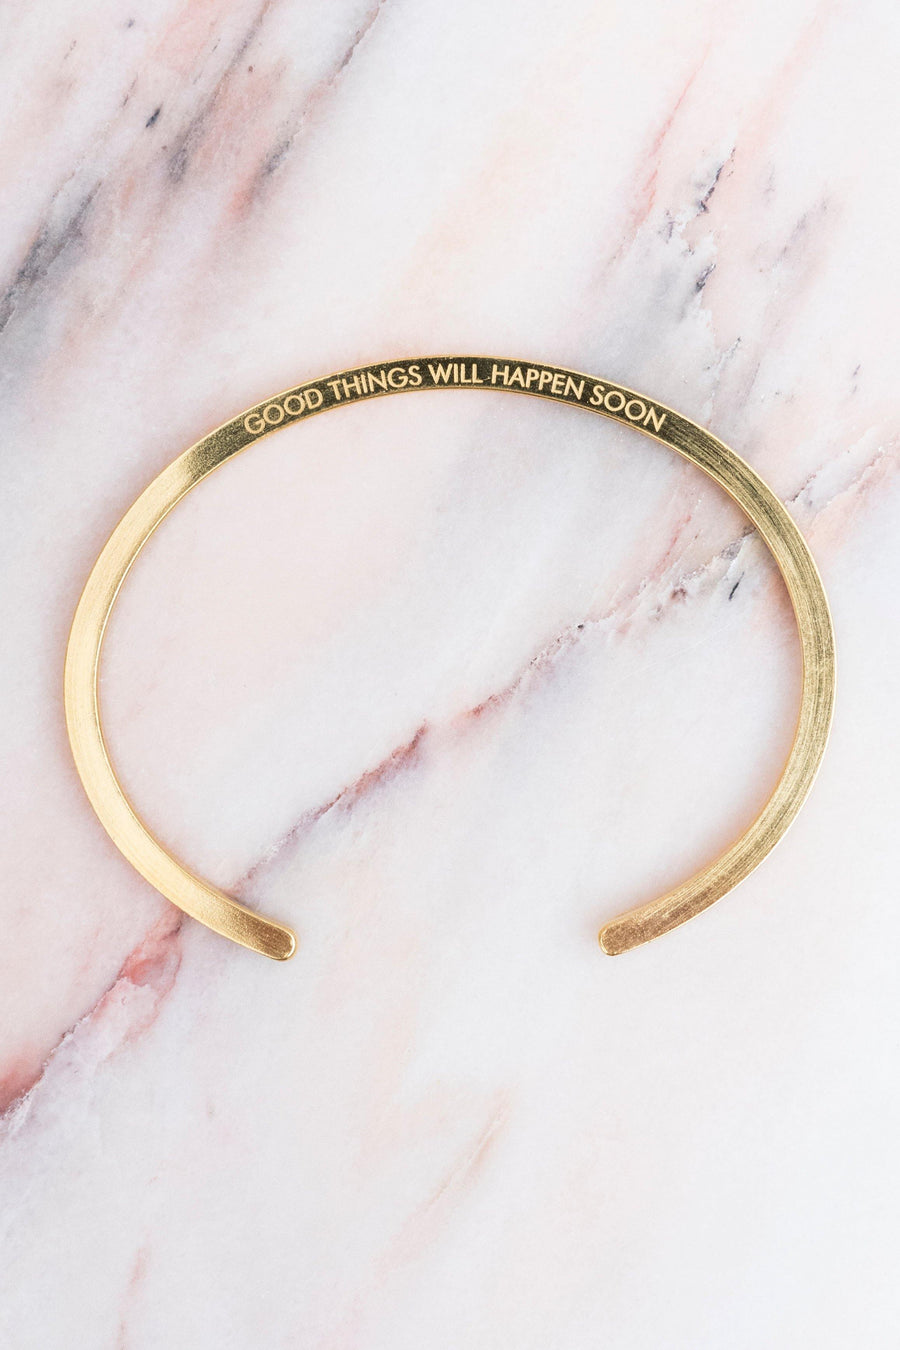 Kiki Dieterle x The Good Store Bracelet gold plated - The Good Store Berlin